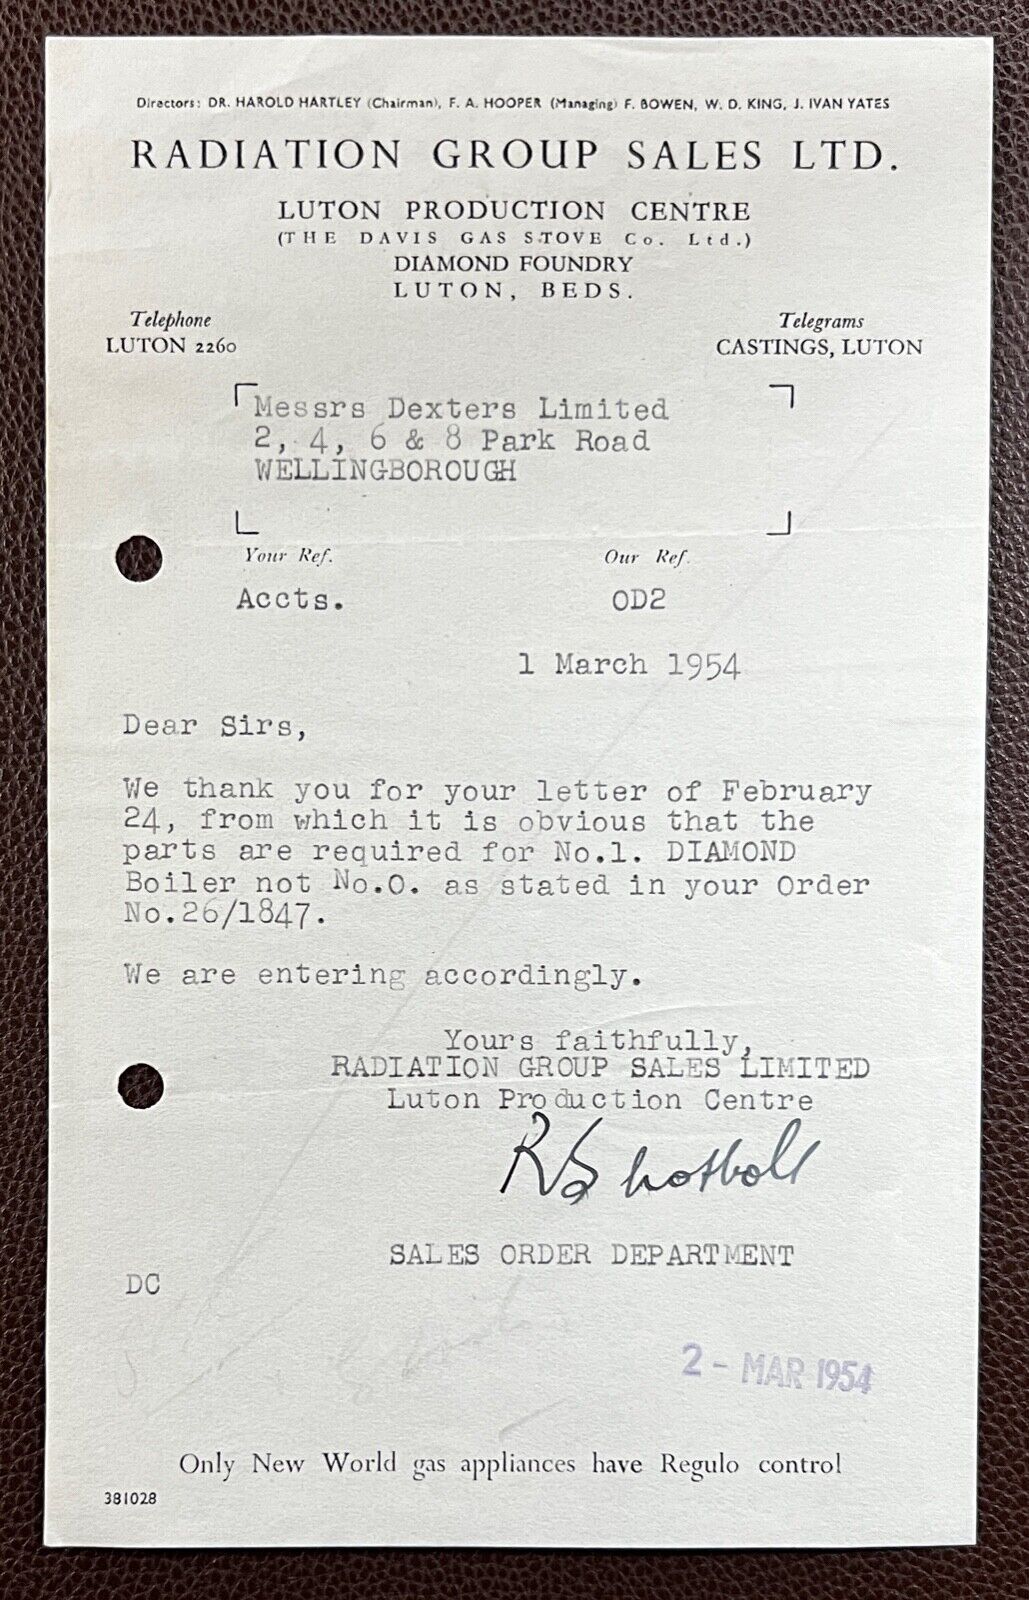 1954 Radiation Group Sales, Diamond Foundry, Luton, Beds Letter